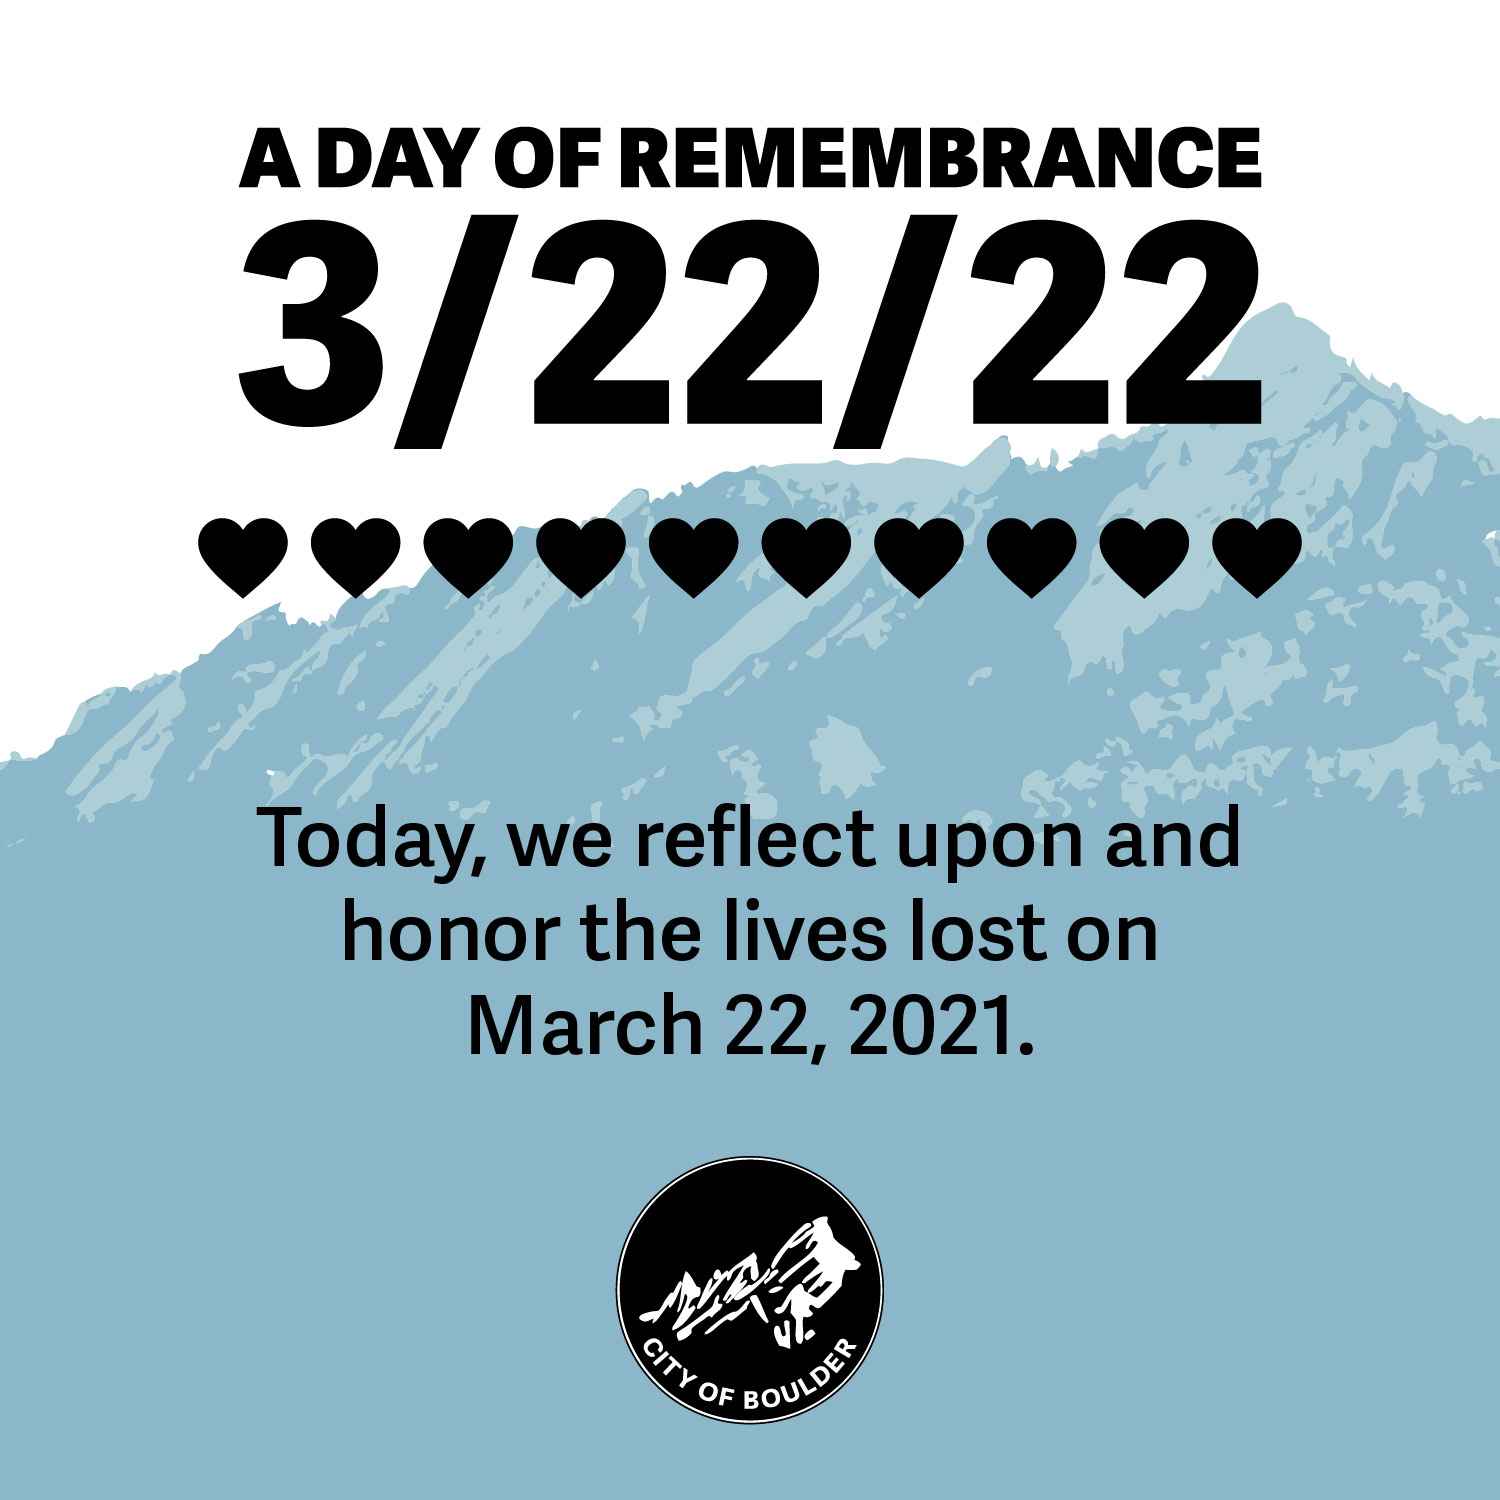 A Day of Remembrance 3/22/22 Today, we reflect upon and honor the lives lost on March 22, 2021.